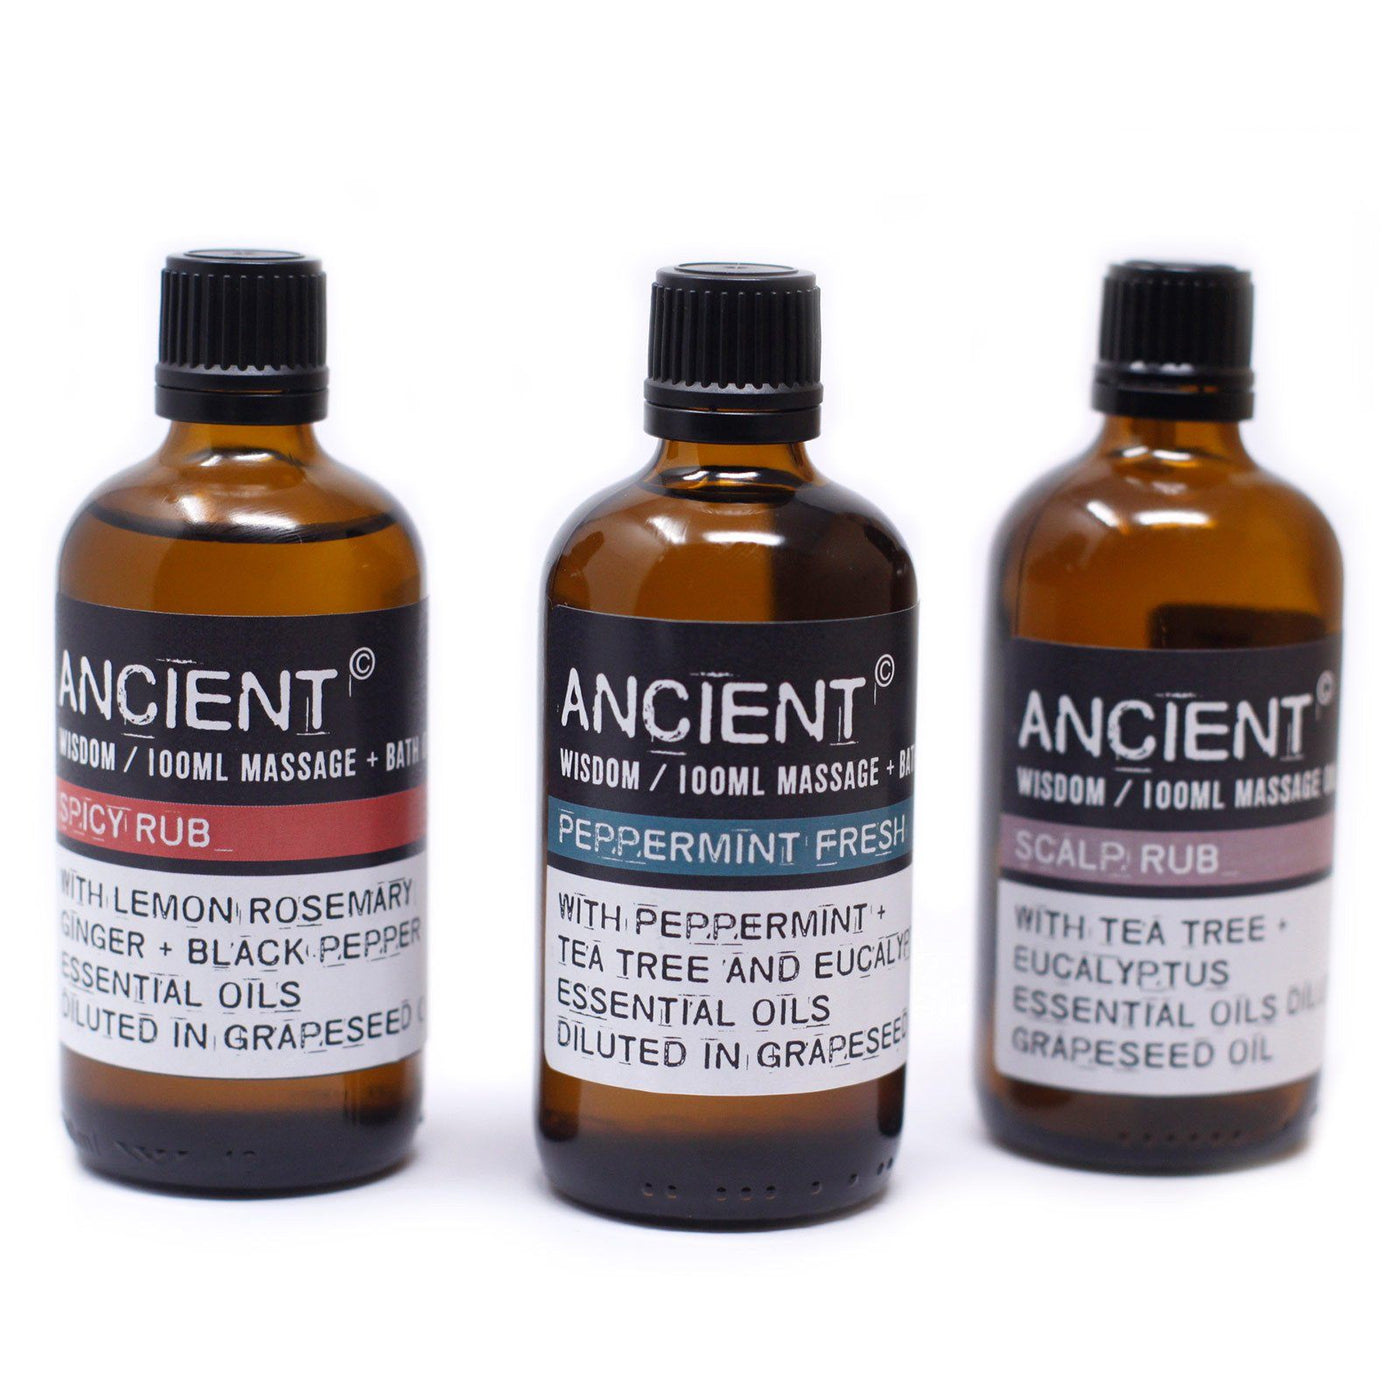 These mixed massage oils contain a blend of Rosemary, Geranium & Bergamot Essential Oils blended in Grapeseed Oil.